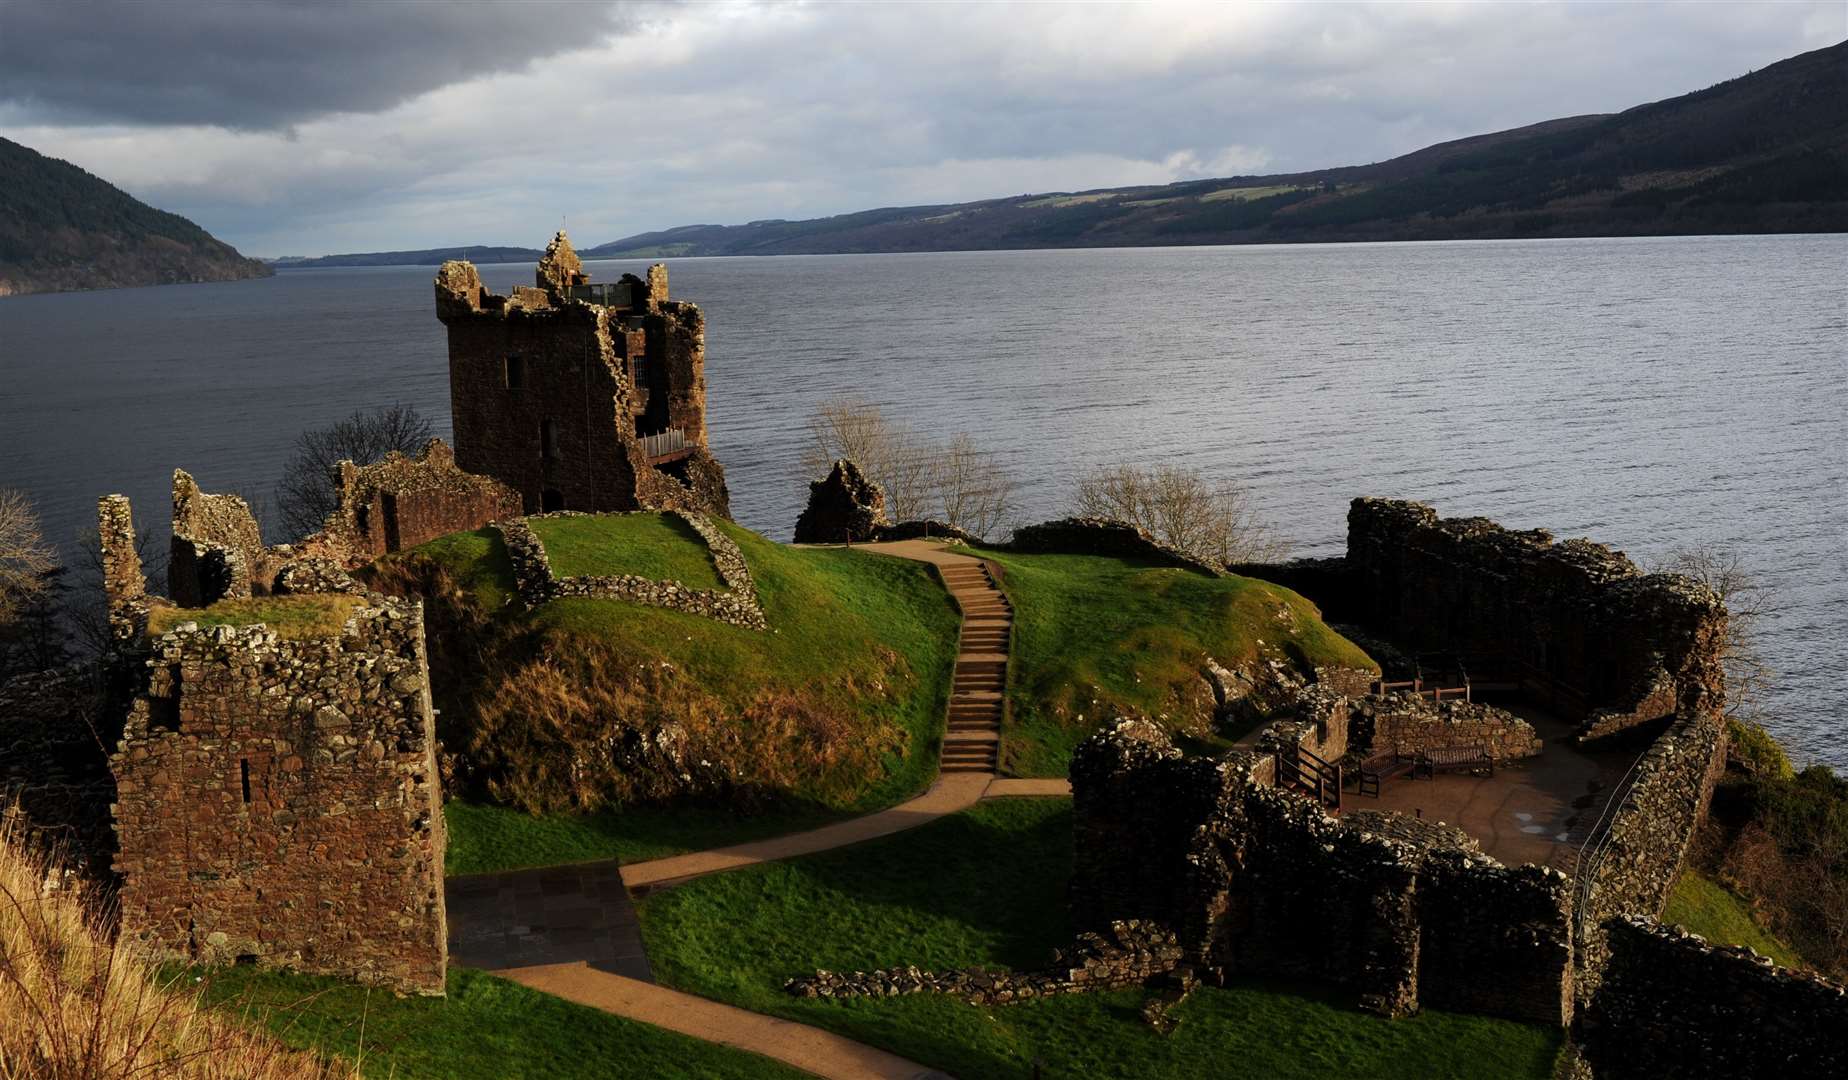 A landslide forced the partial closure of the A82 one mile south of Urquhart Castle.